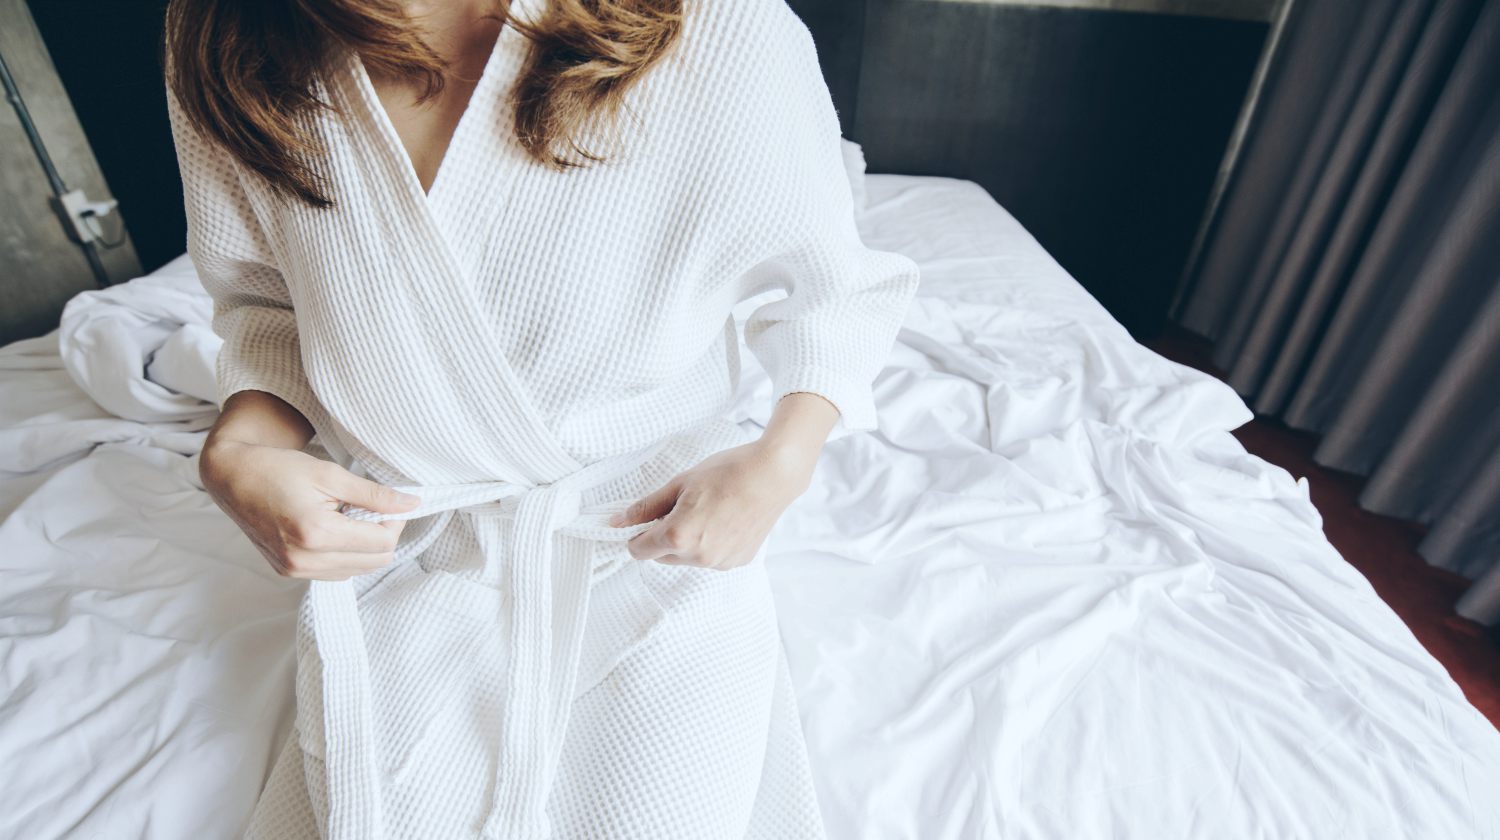 FAQs About the Best Hotel Robes and Where to Find Them